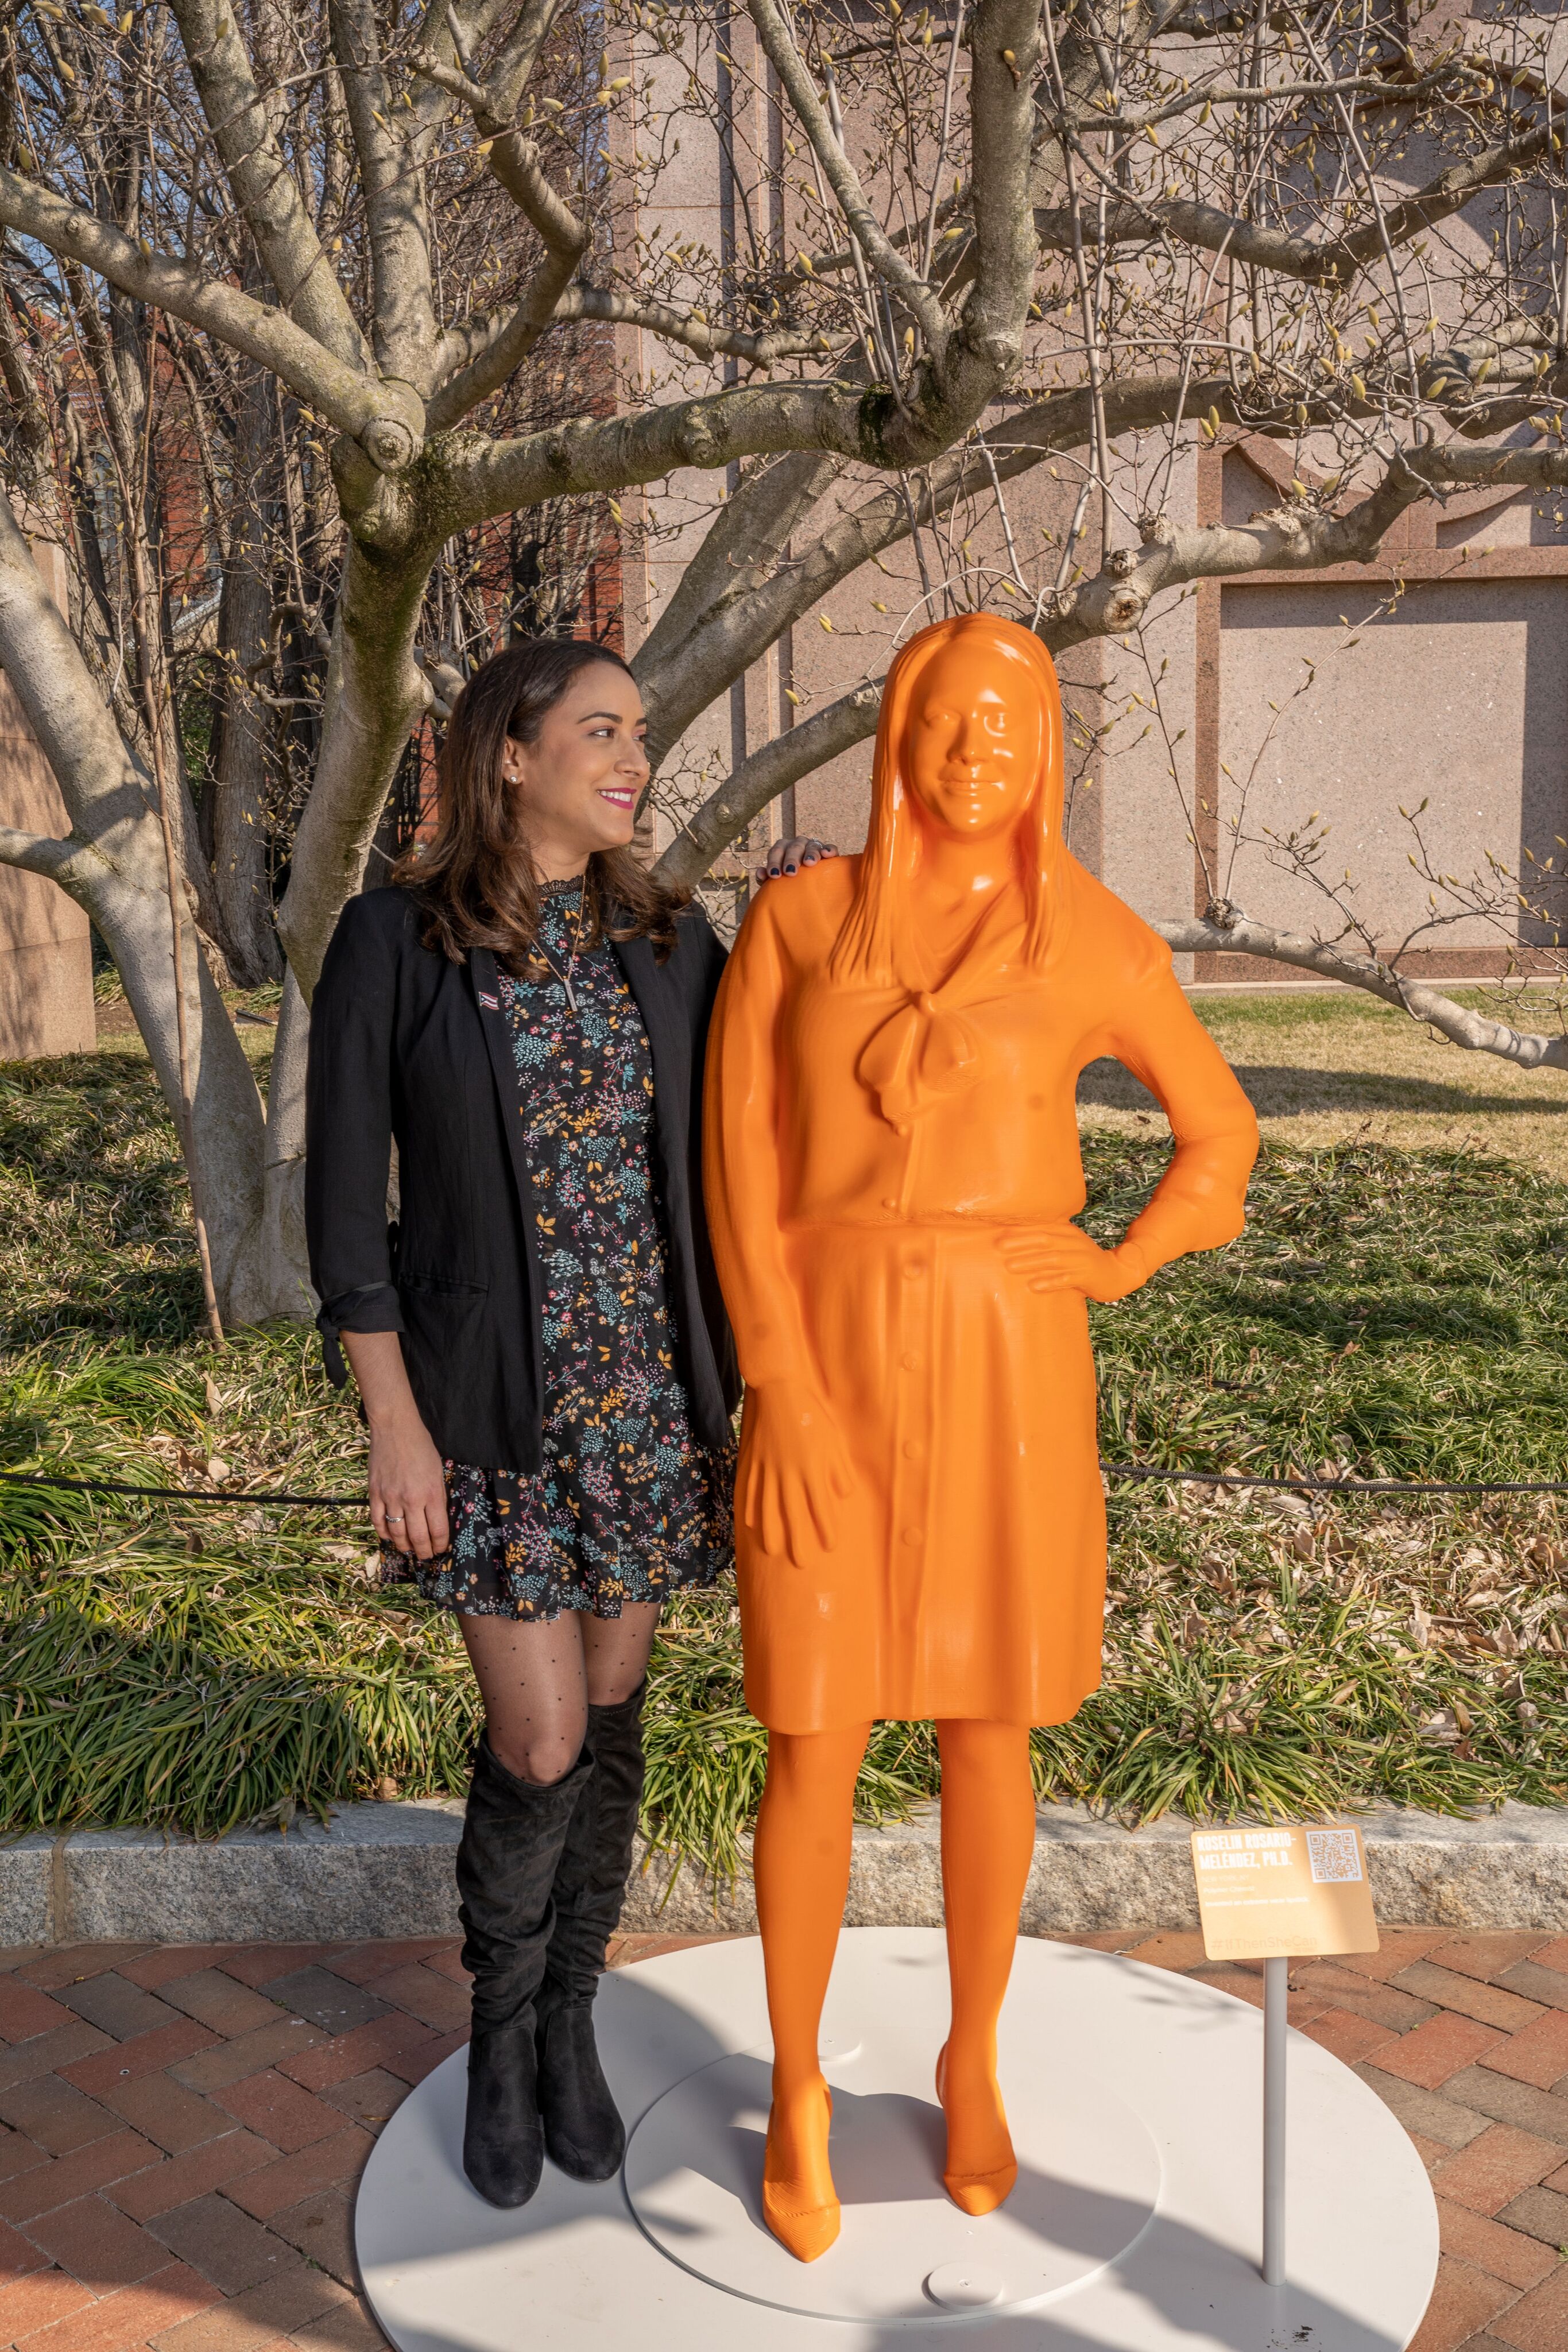 New campus statue honors women in engineering